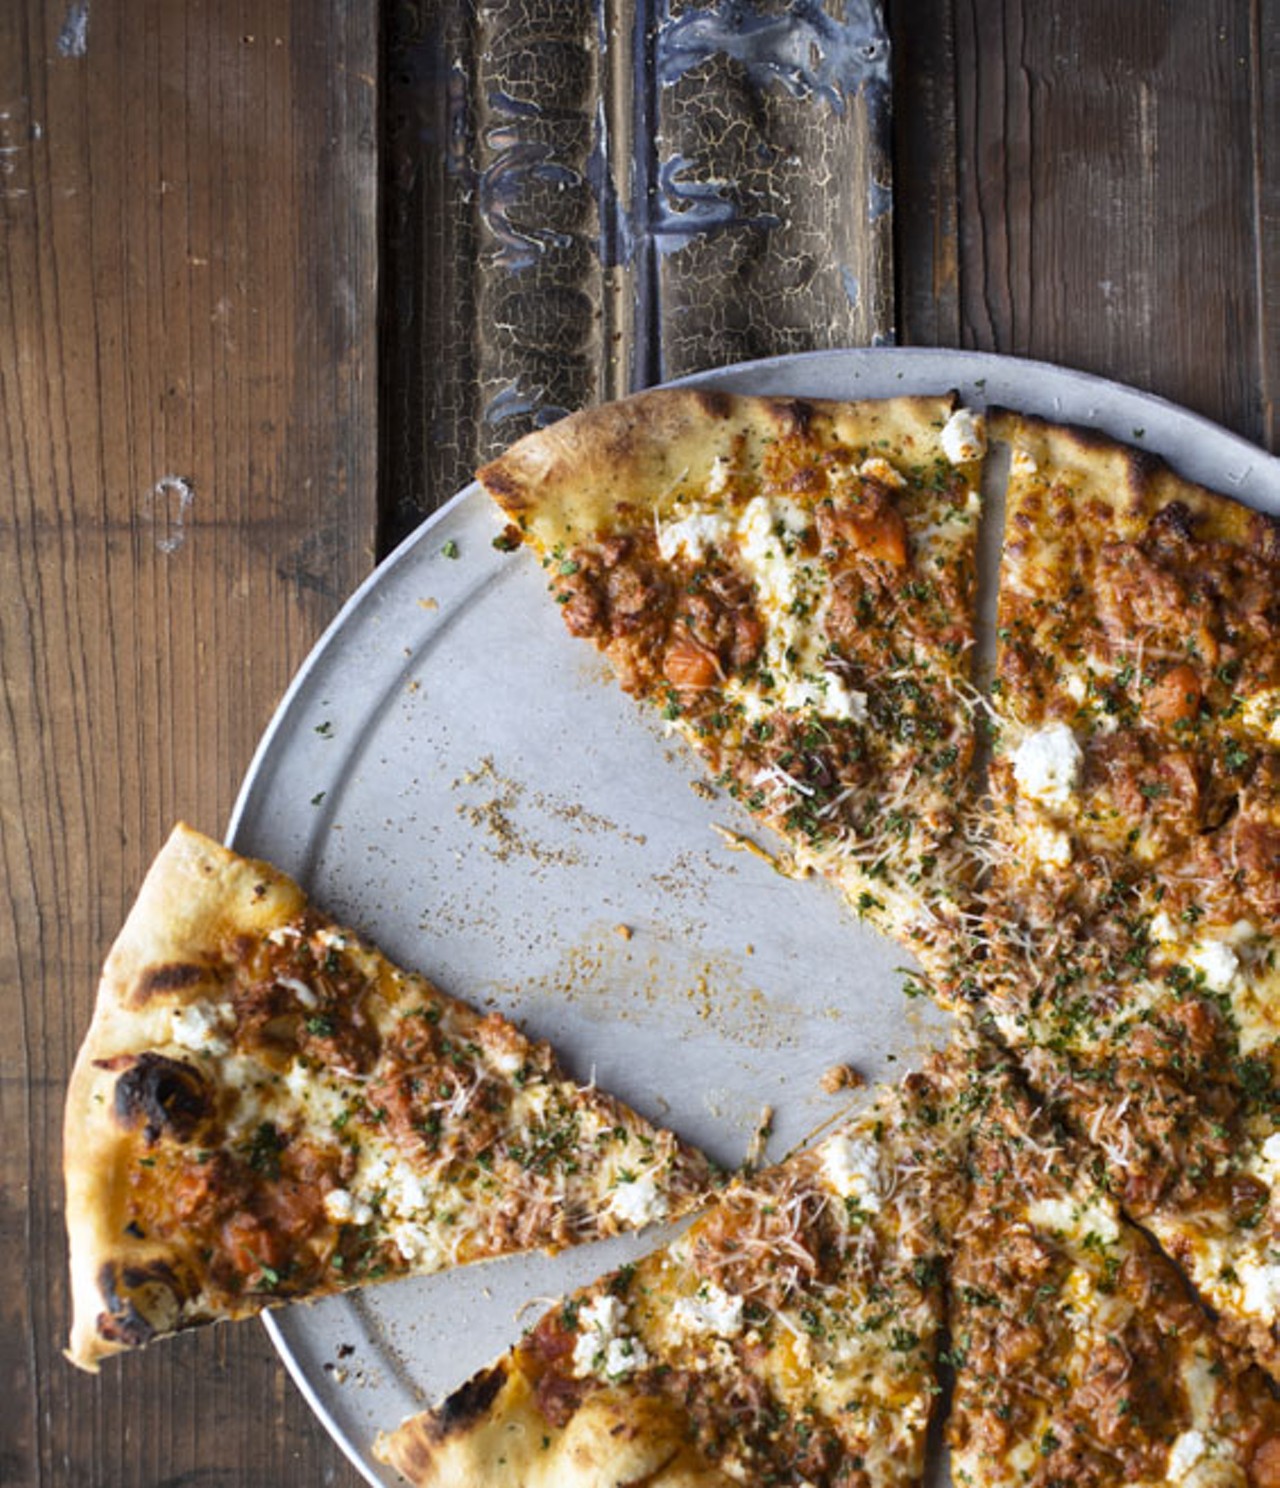 The "Bolo" is a New York-style pizza with an olive-oil crust, herbs, mozzarella, ricotta, savory pork and beef bolognese, fresh-grated Parmesan and parsley.